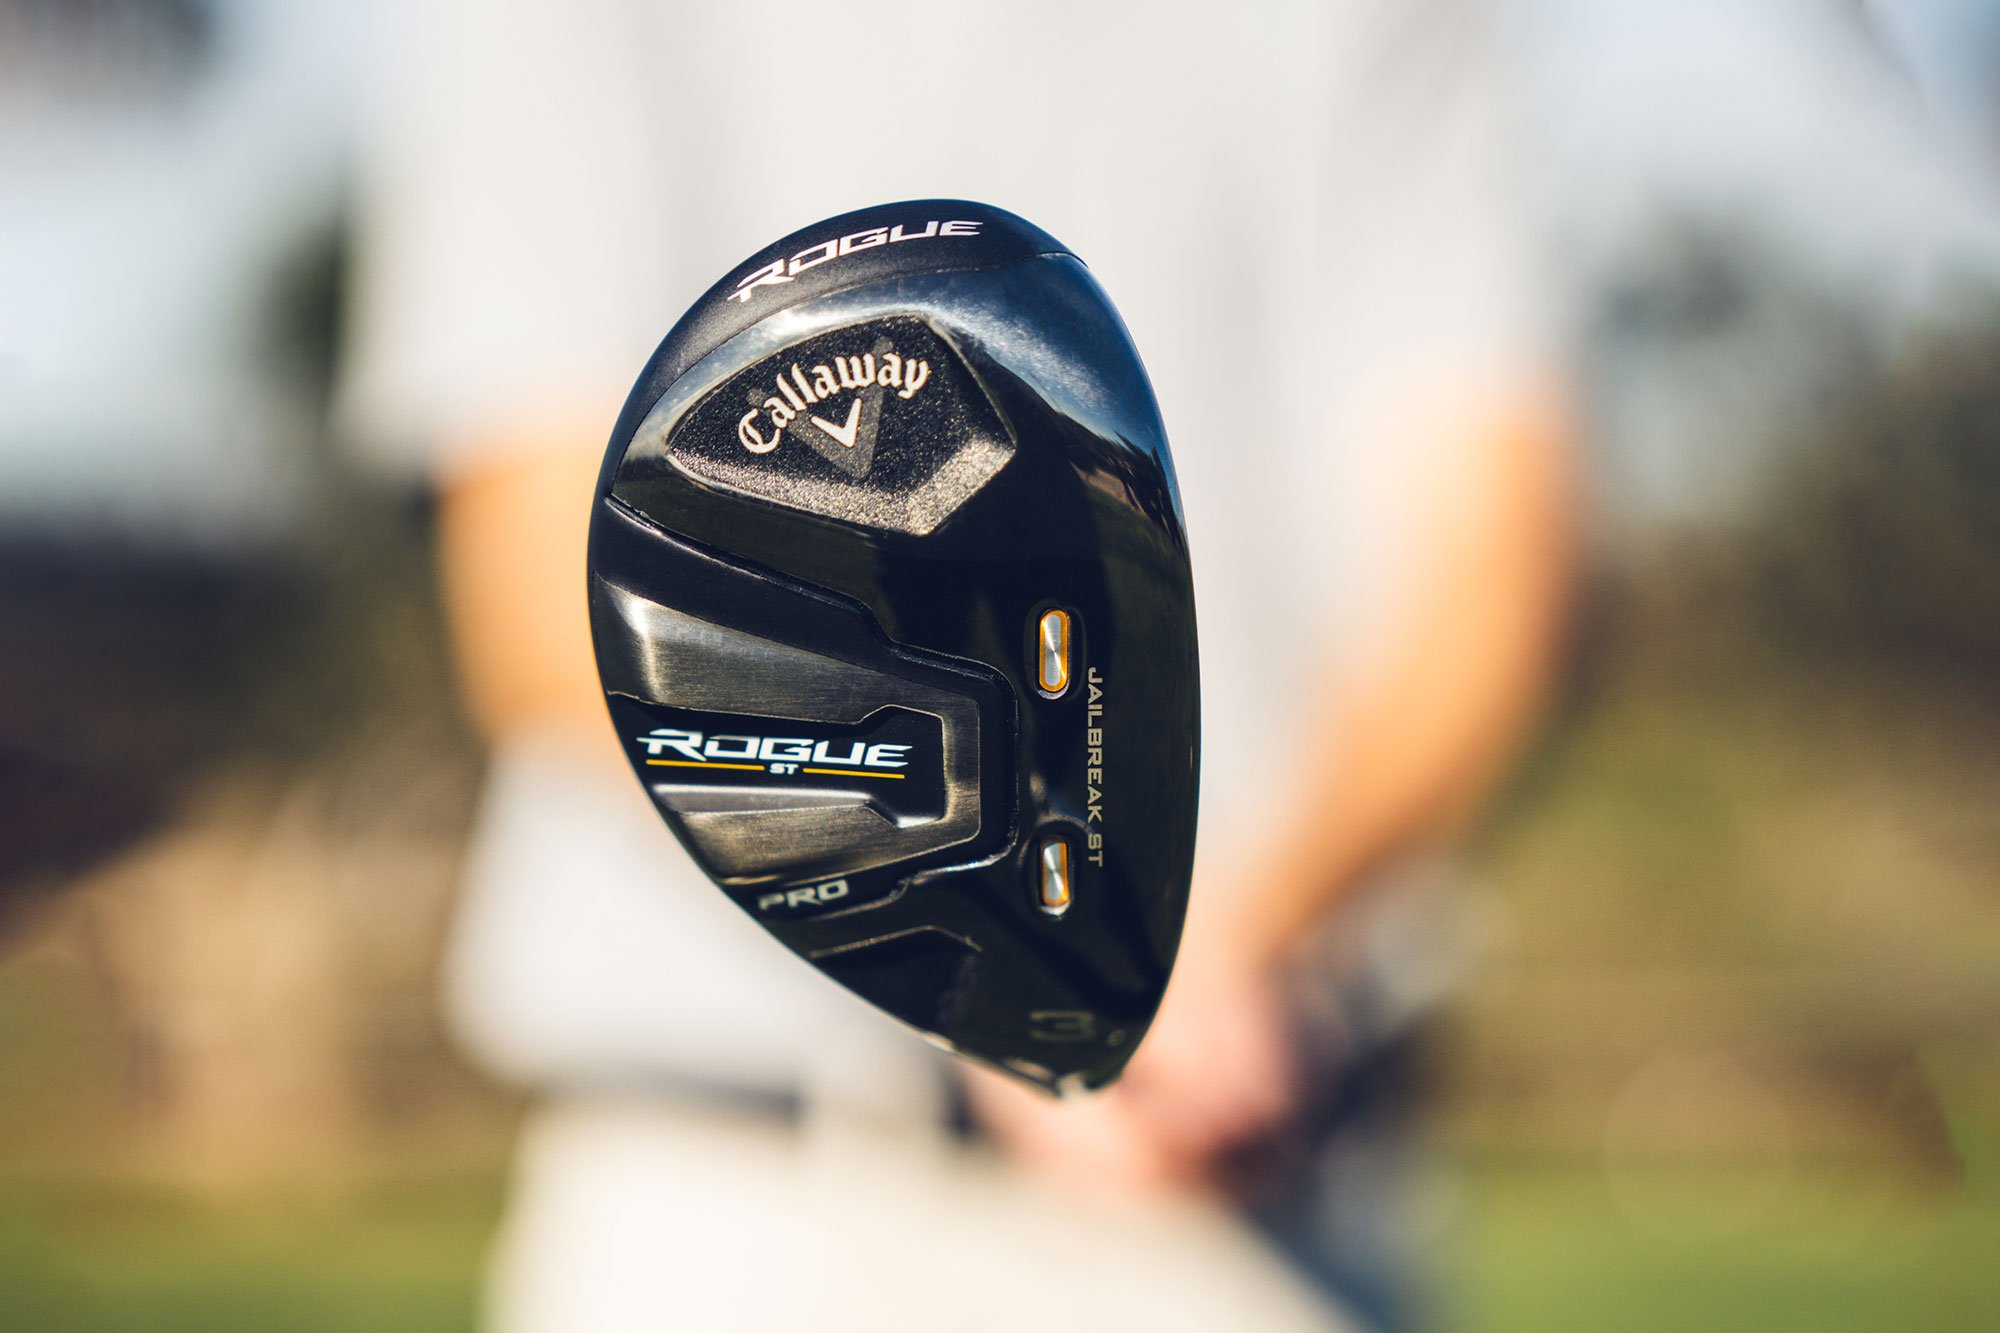 Callaway Rogue ST Pro Hybrid review